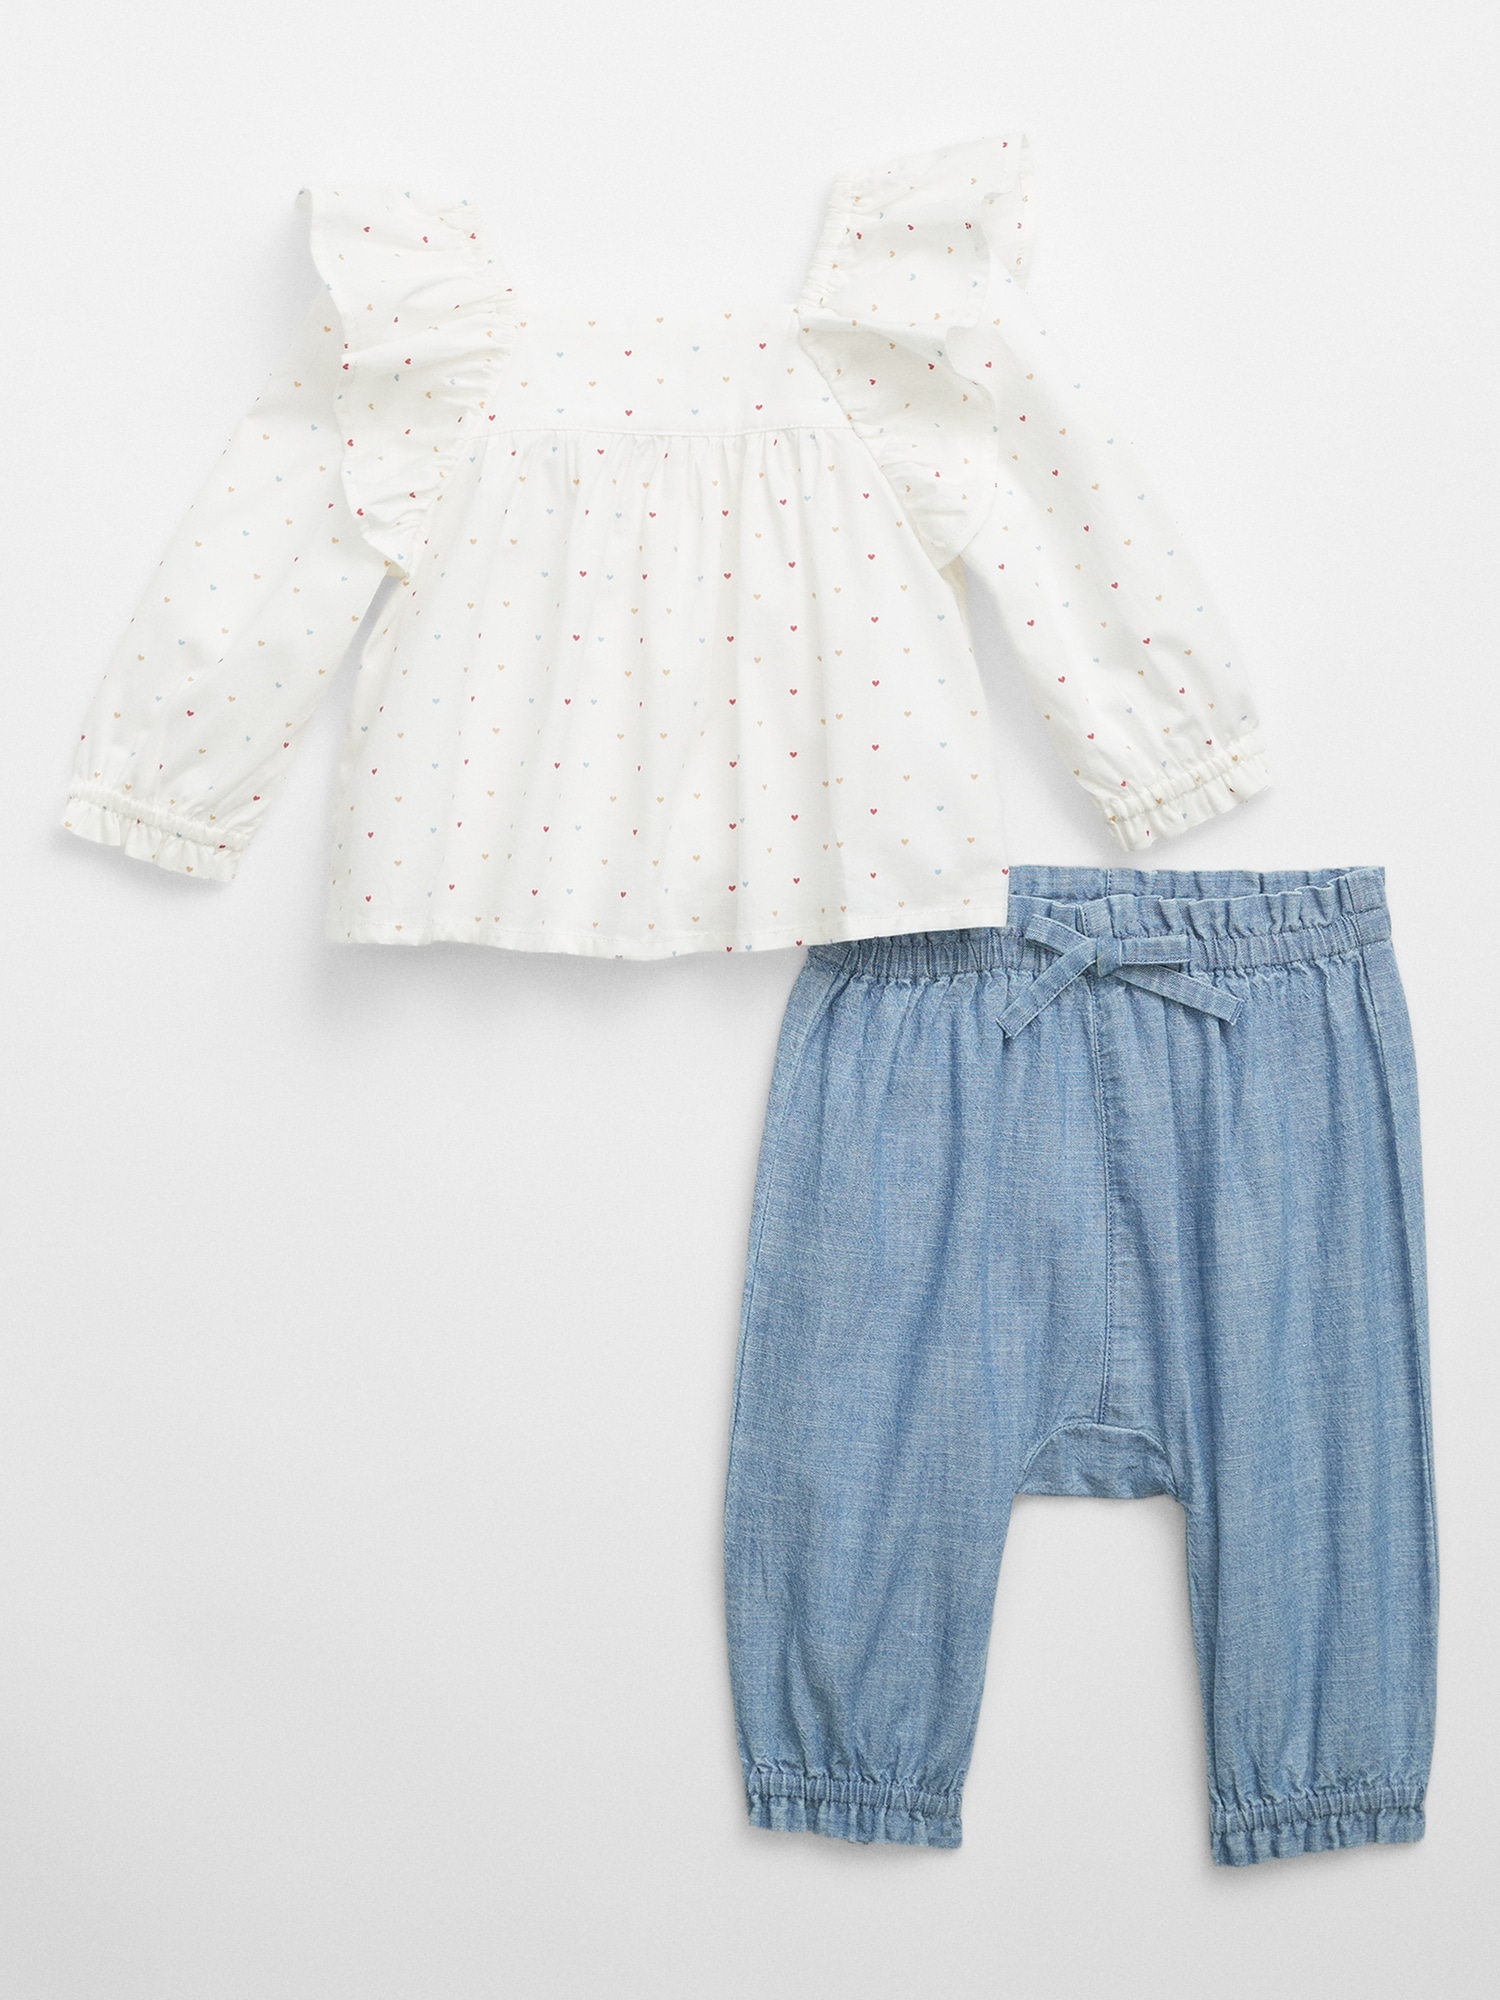 Baby Two-Piece Outfit Set | Gap Factory